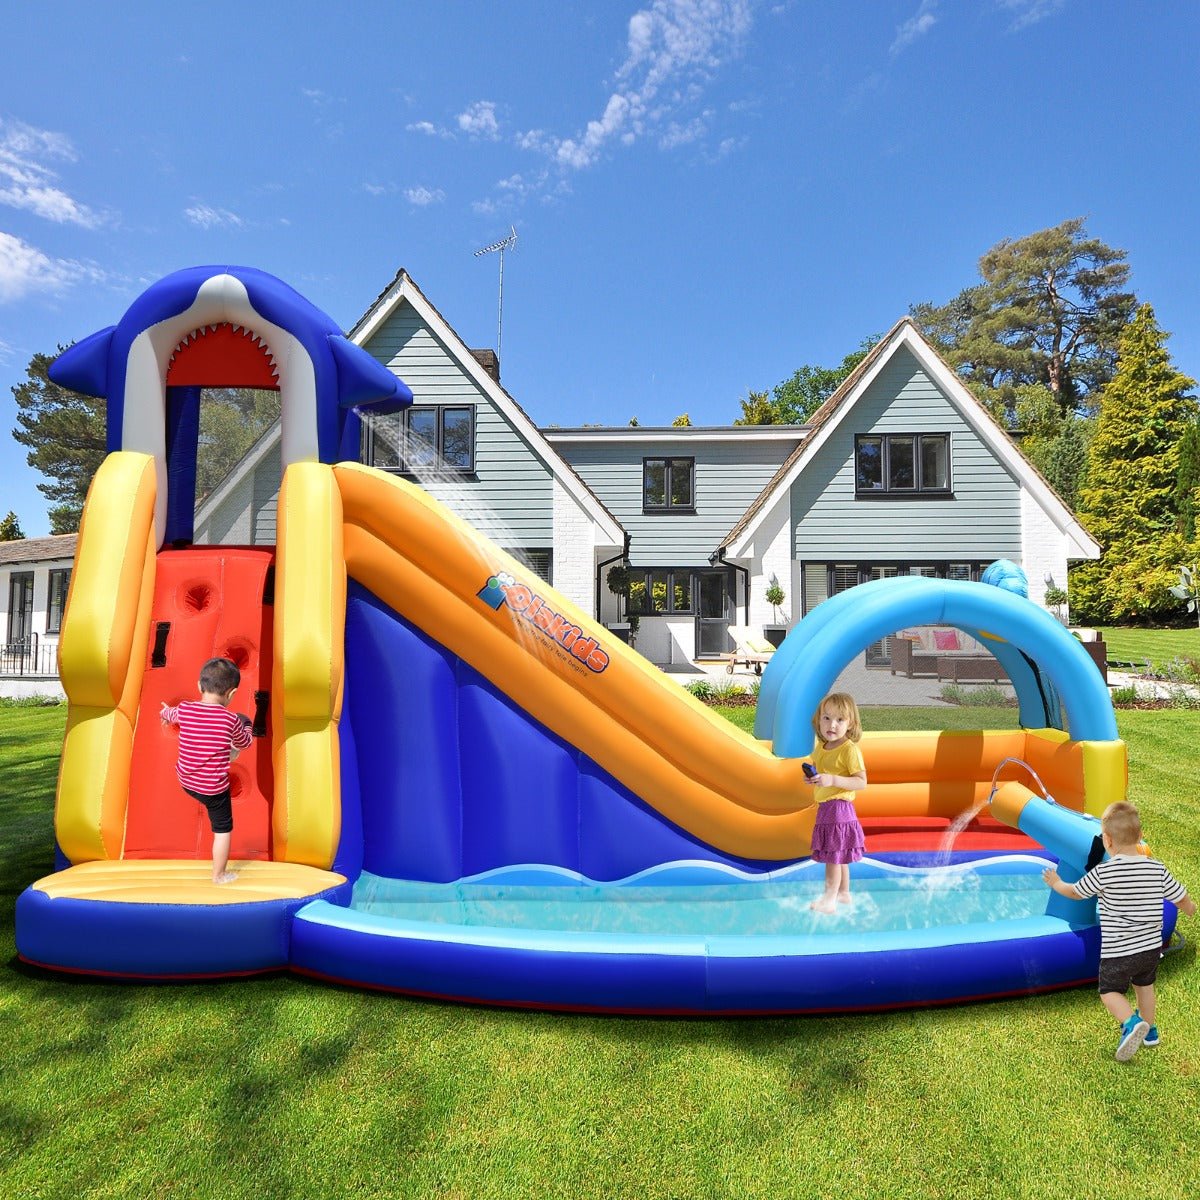 Children's Water Bounce House with Basketball Rim - Active Outdoor Fun